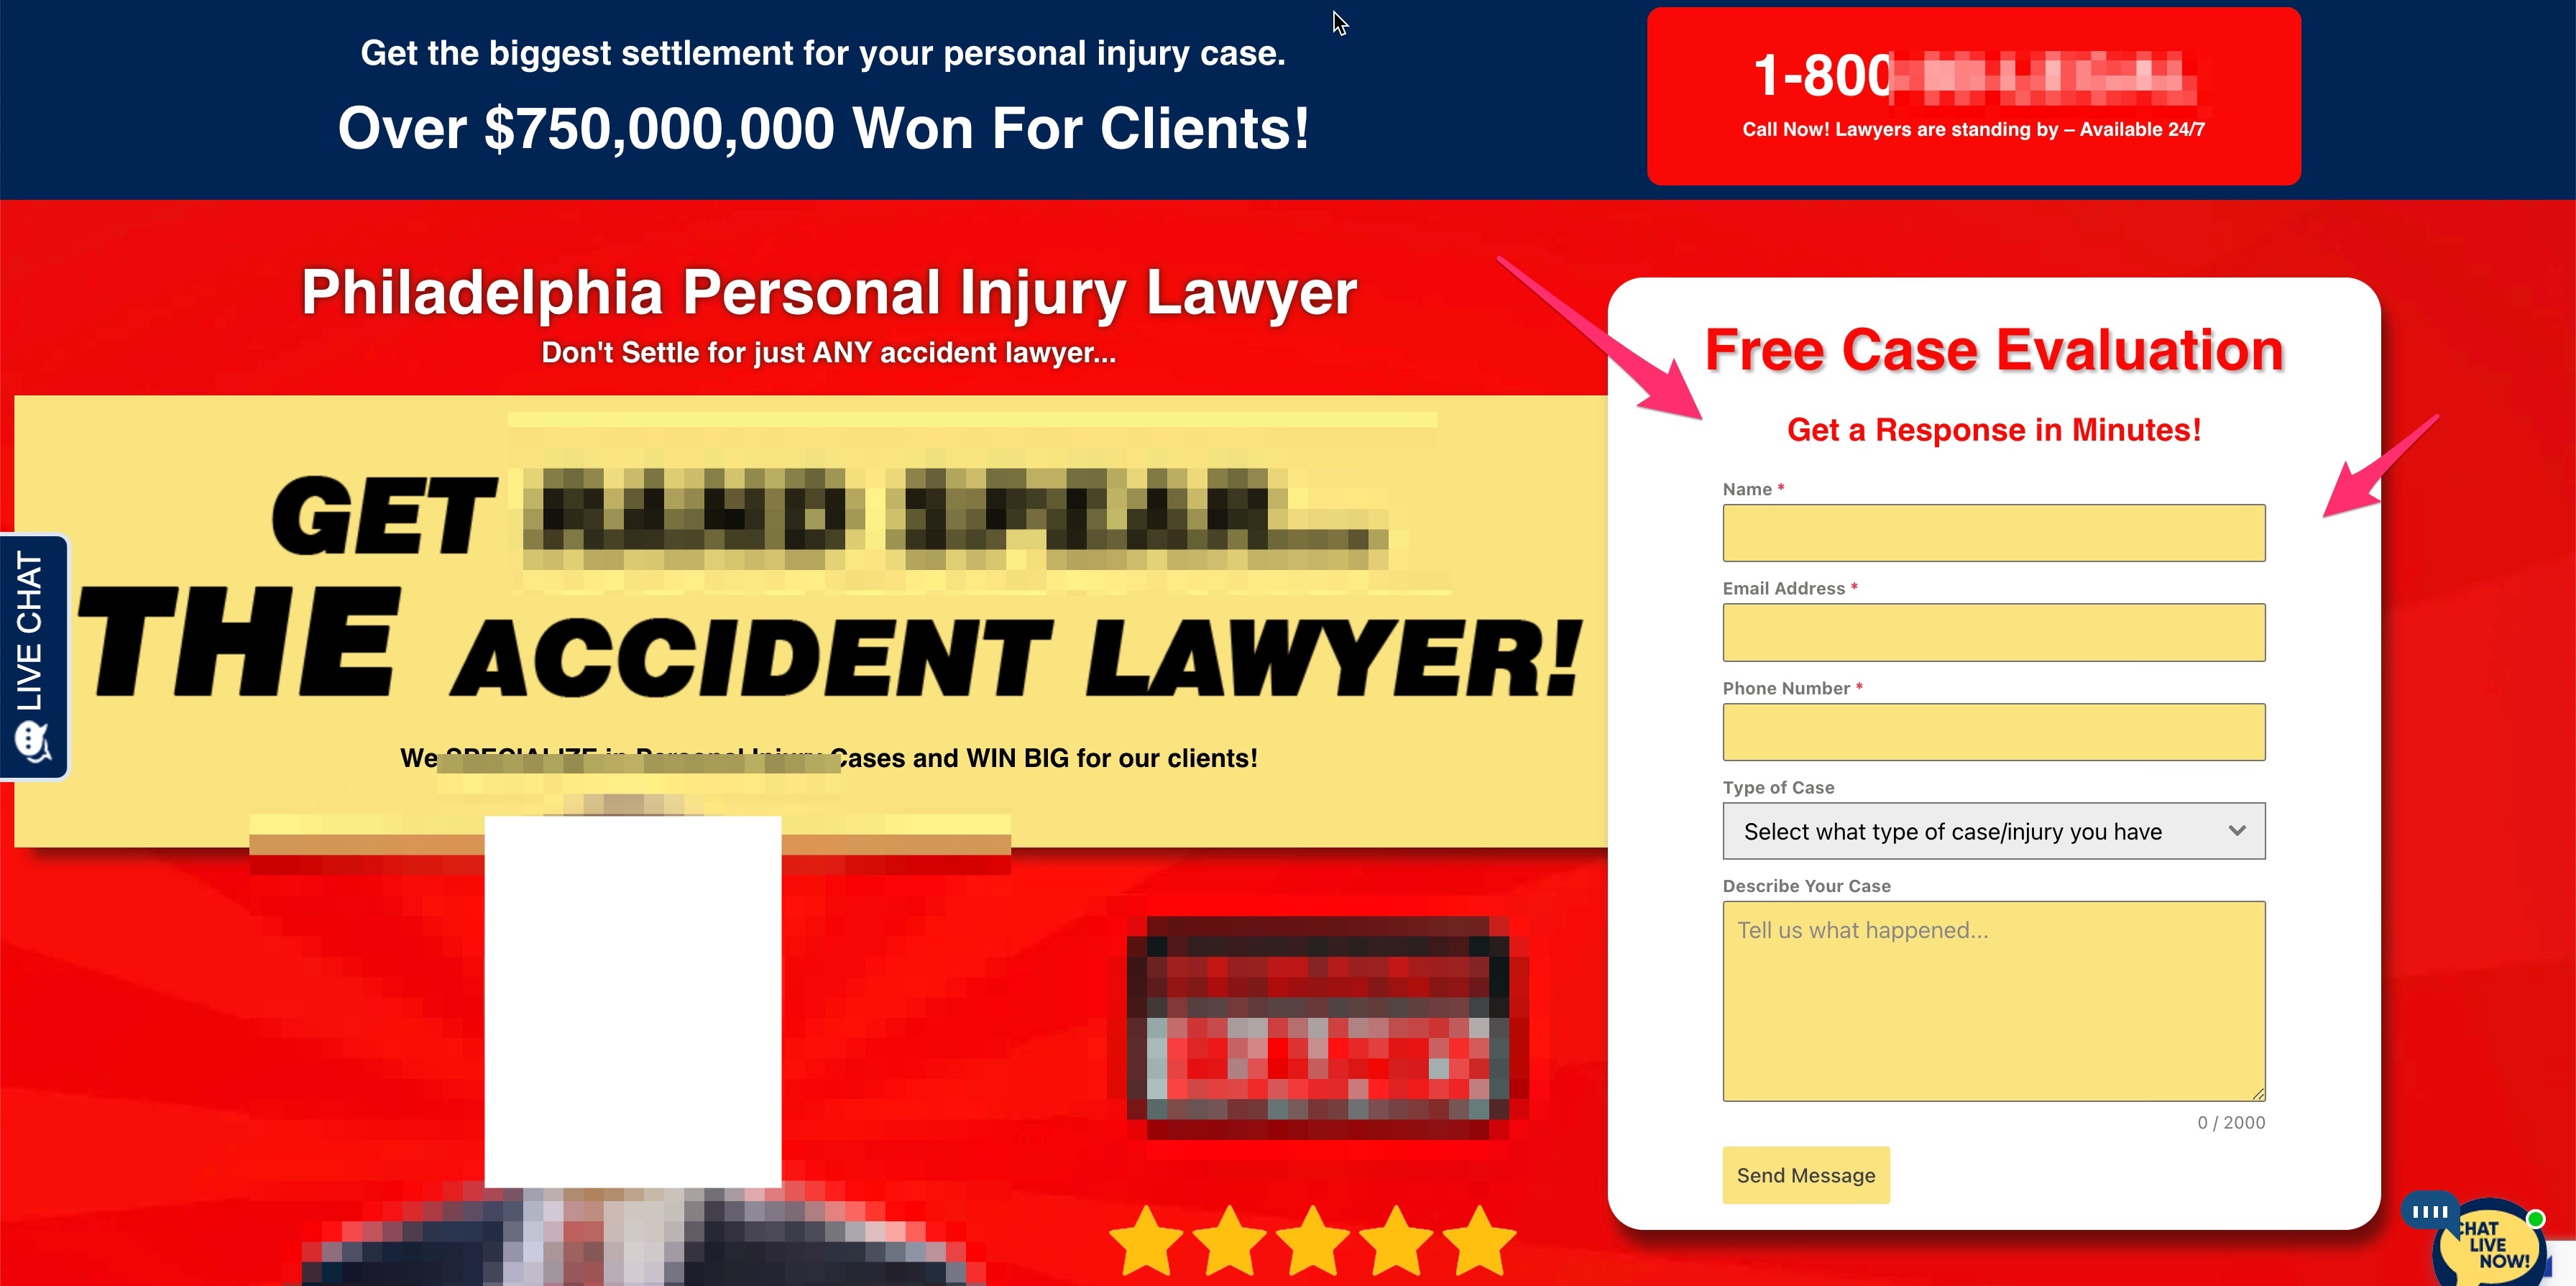 The Distracting Landing Page Form: Floating in a Whirlpool of Yellow and Red